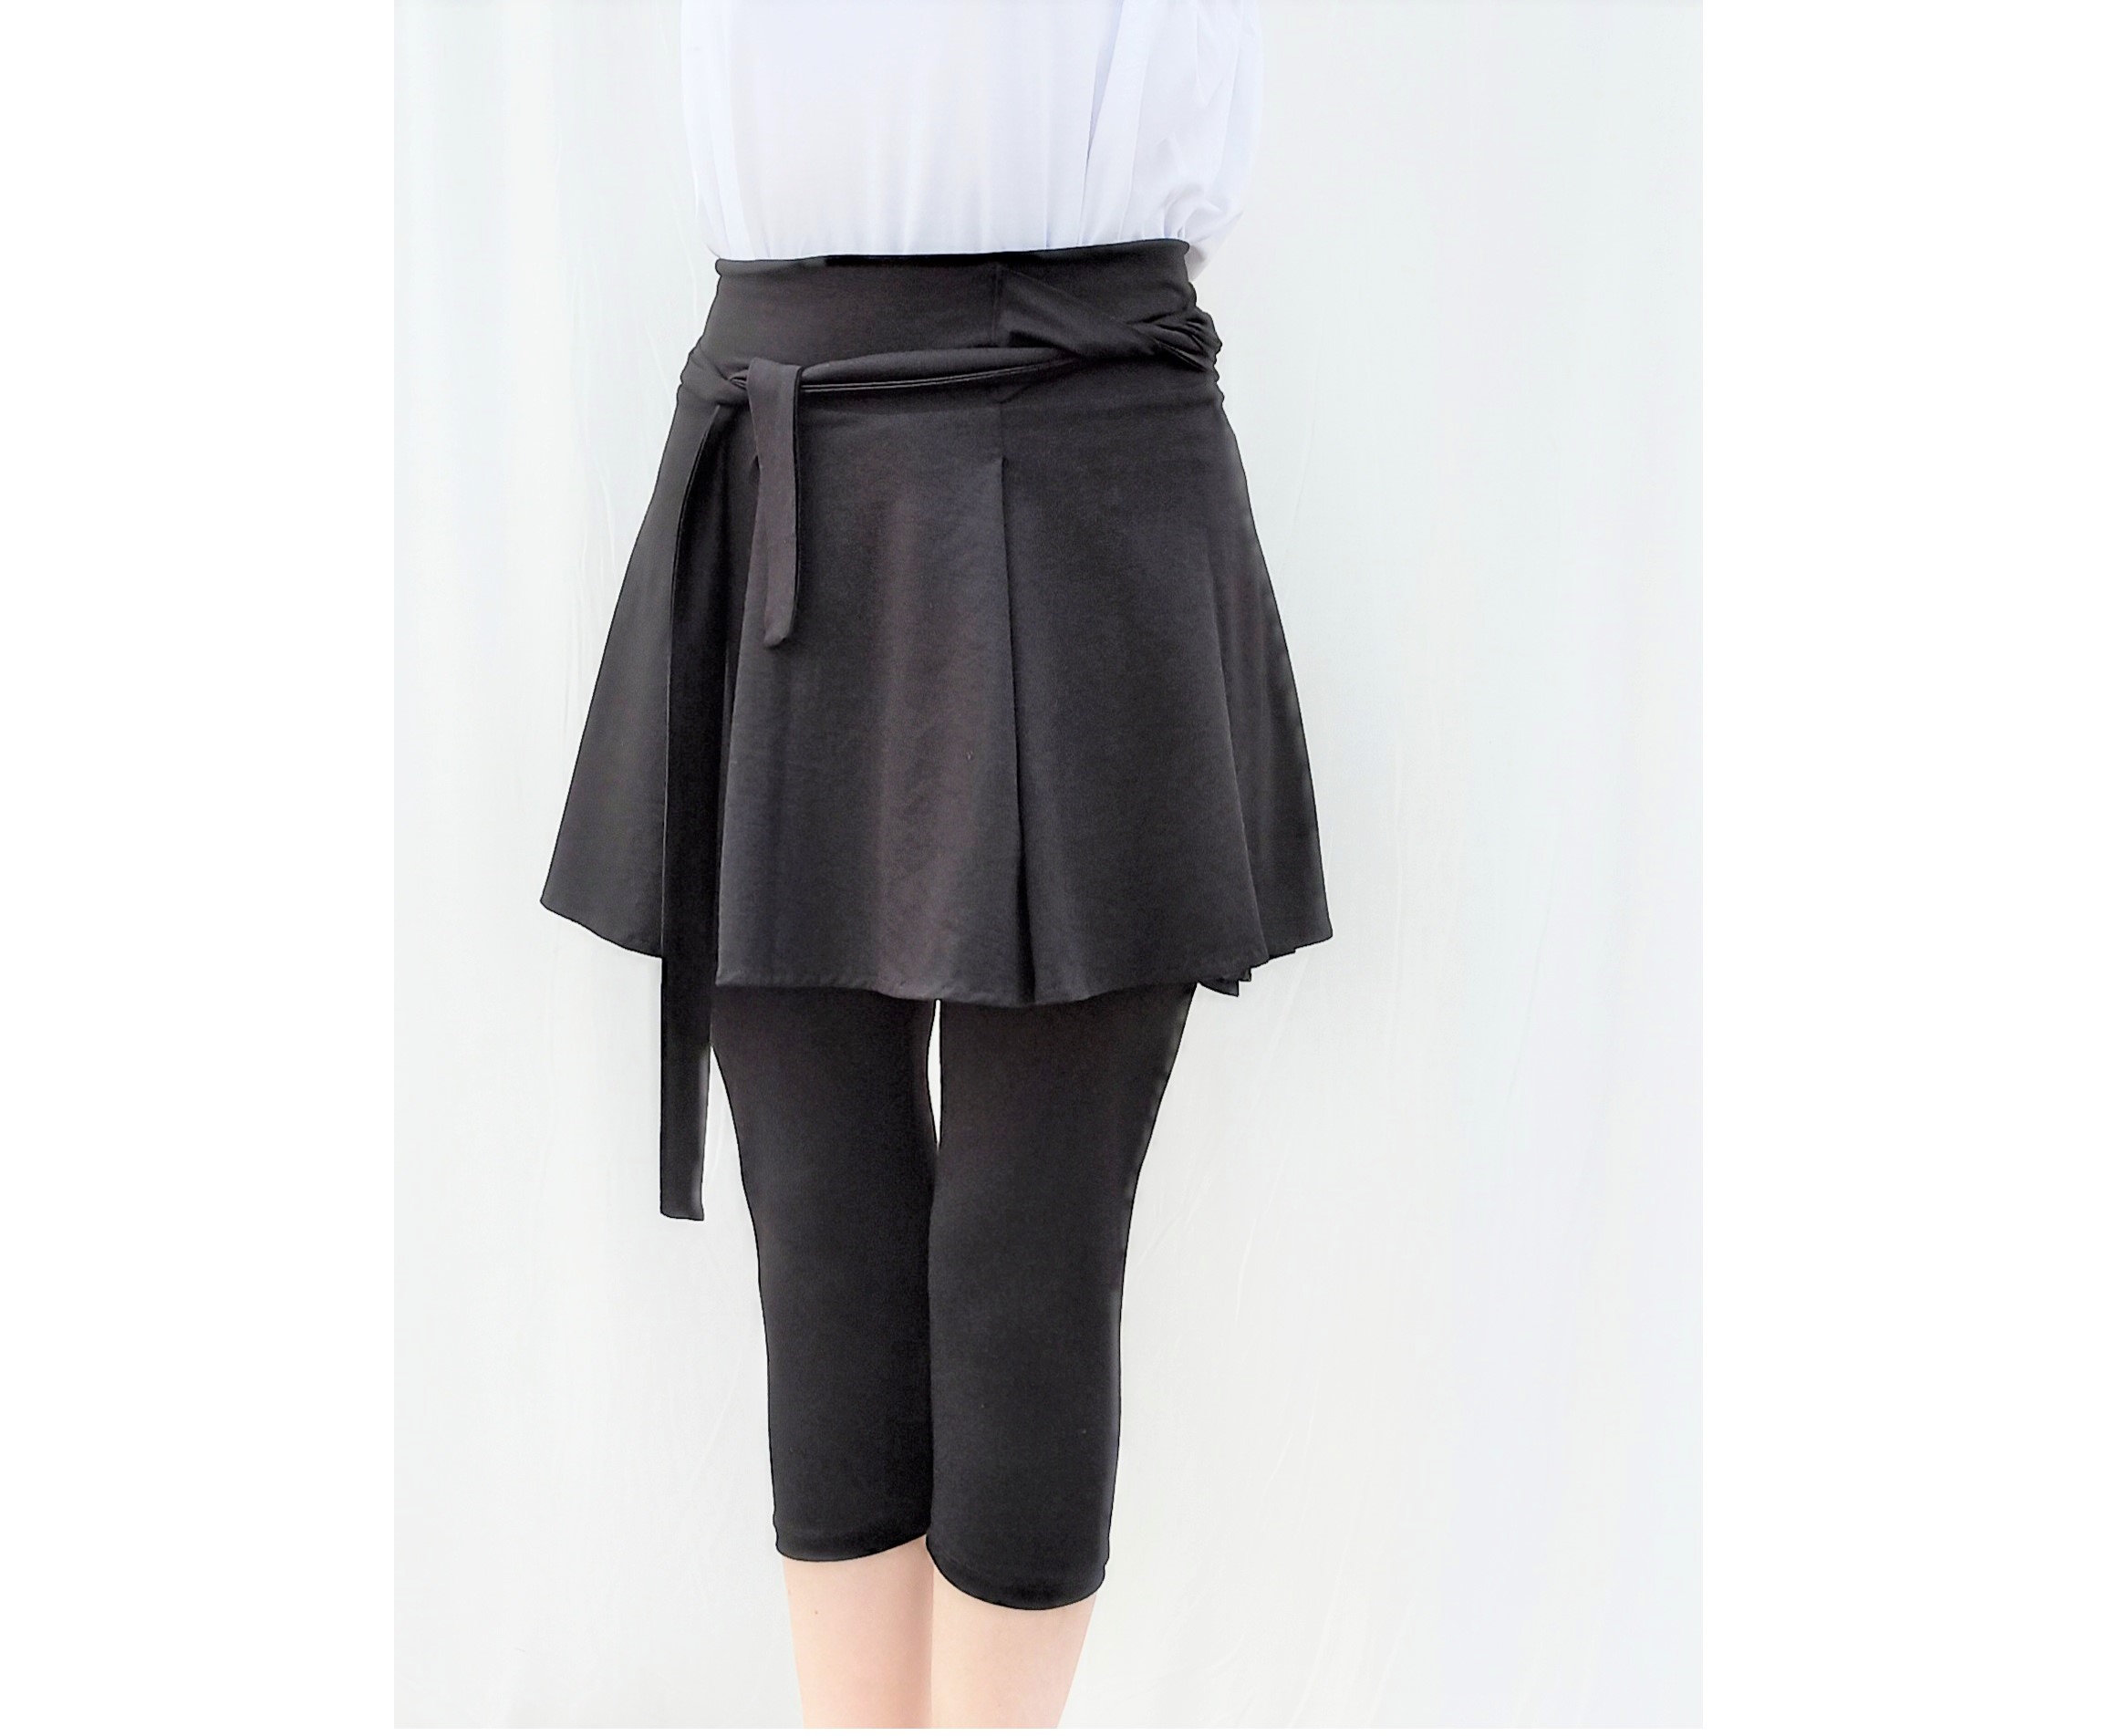 Women's Leggings With a Skirt, Yoga Pants With an Attached Skirt